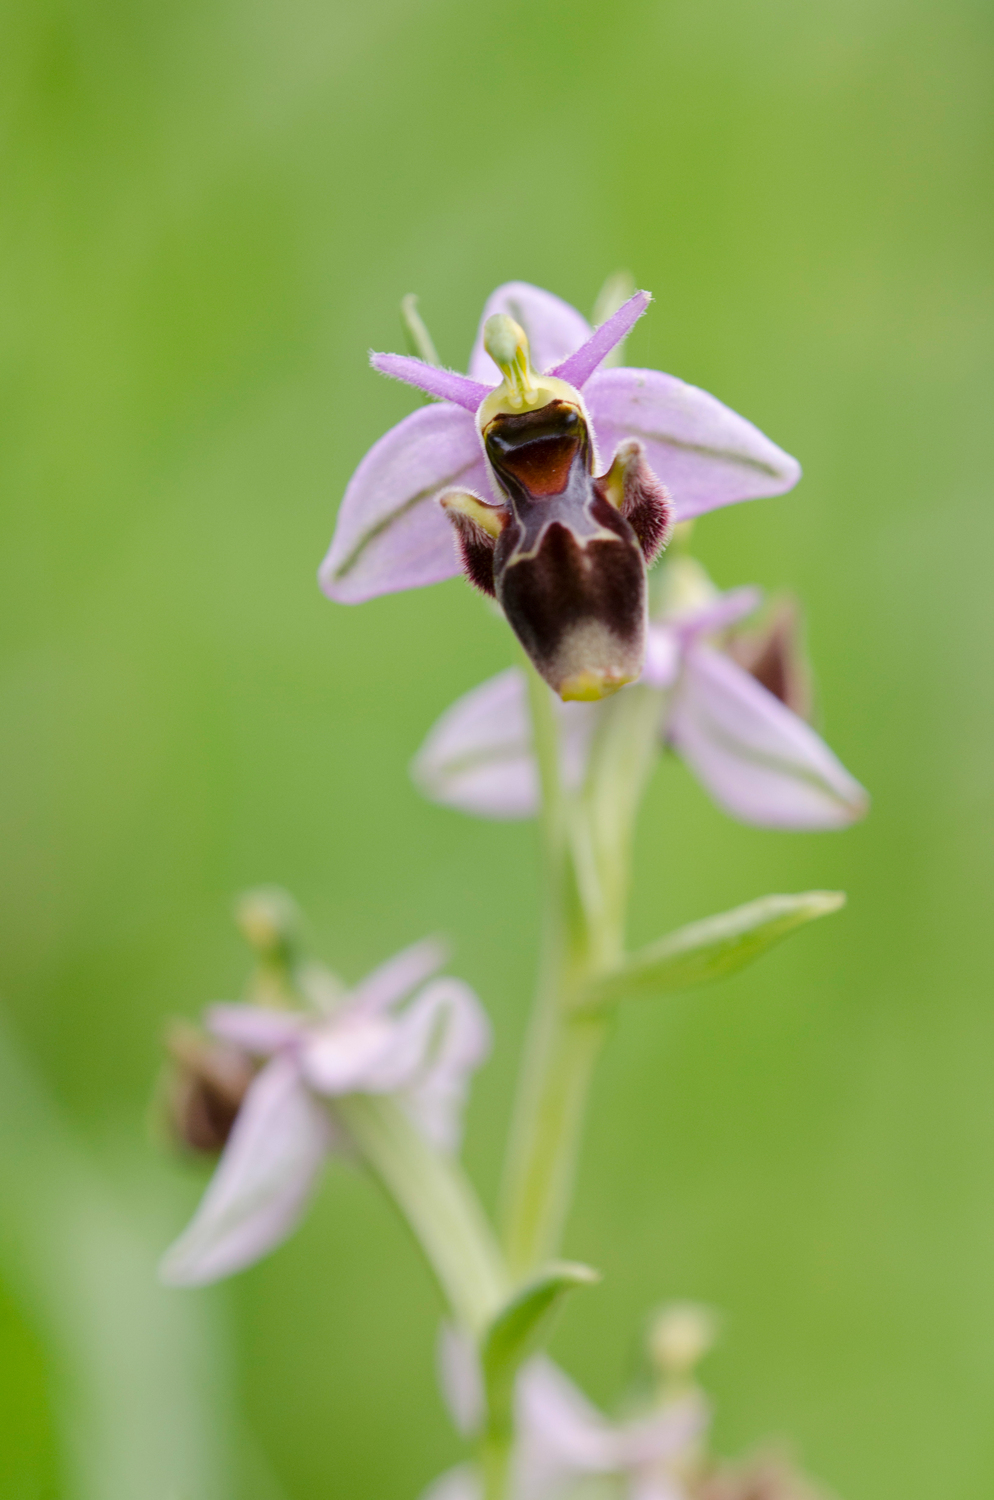 Ophrys scolopax is a type of orchid -  one of the threatened species that was included in the dataset for the study looking at the effects of lower nitrate concentrations in comparison with phosphate concentrations.